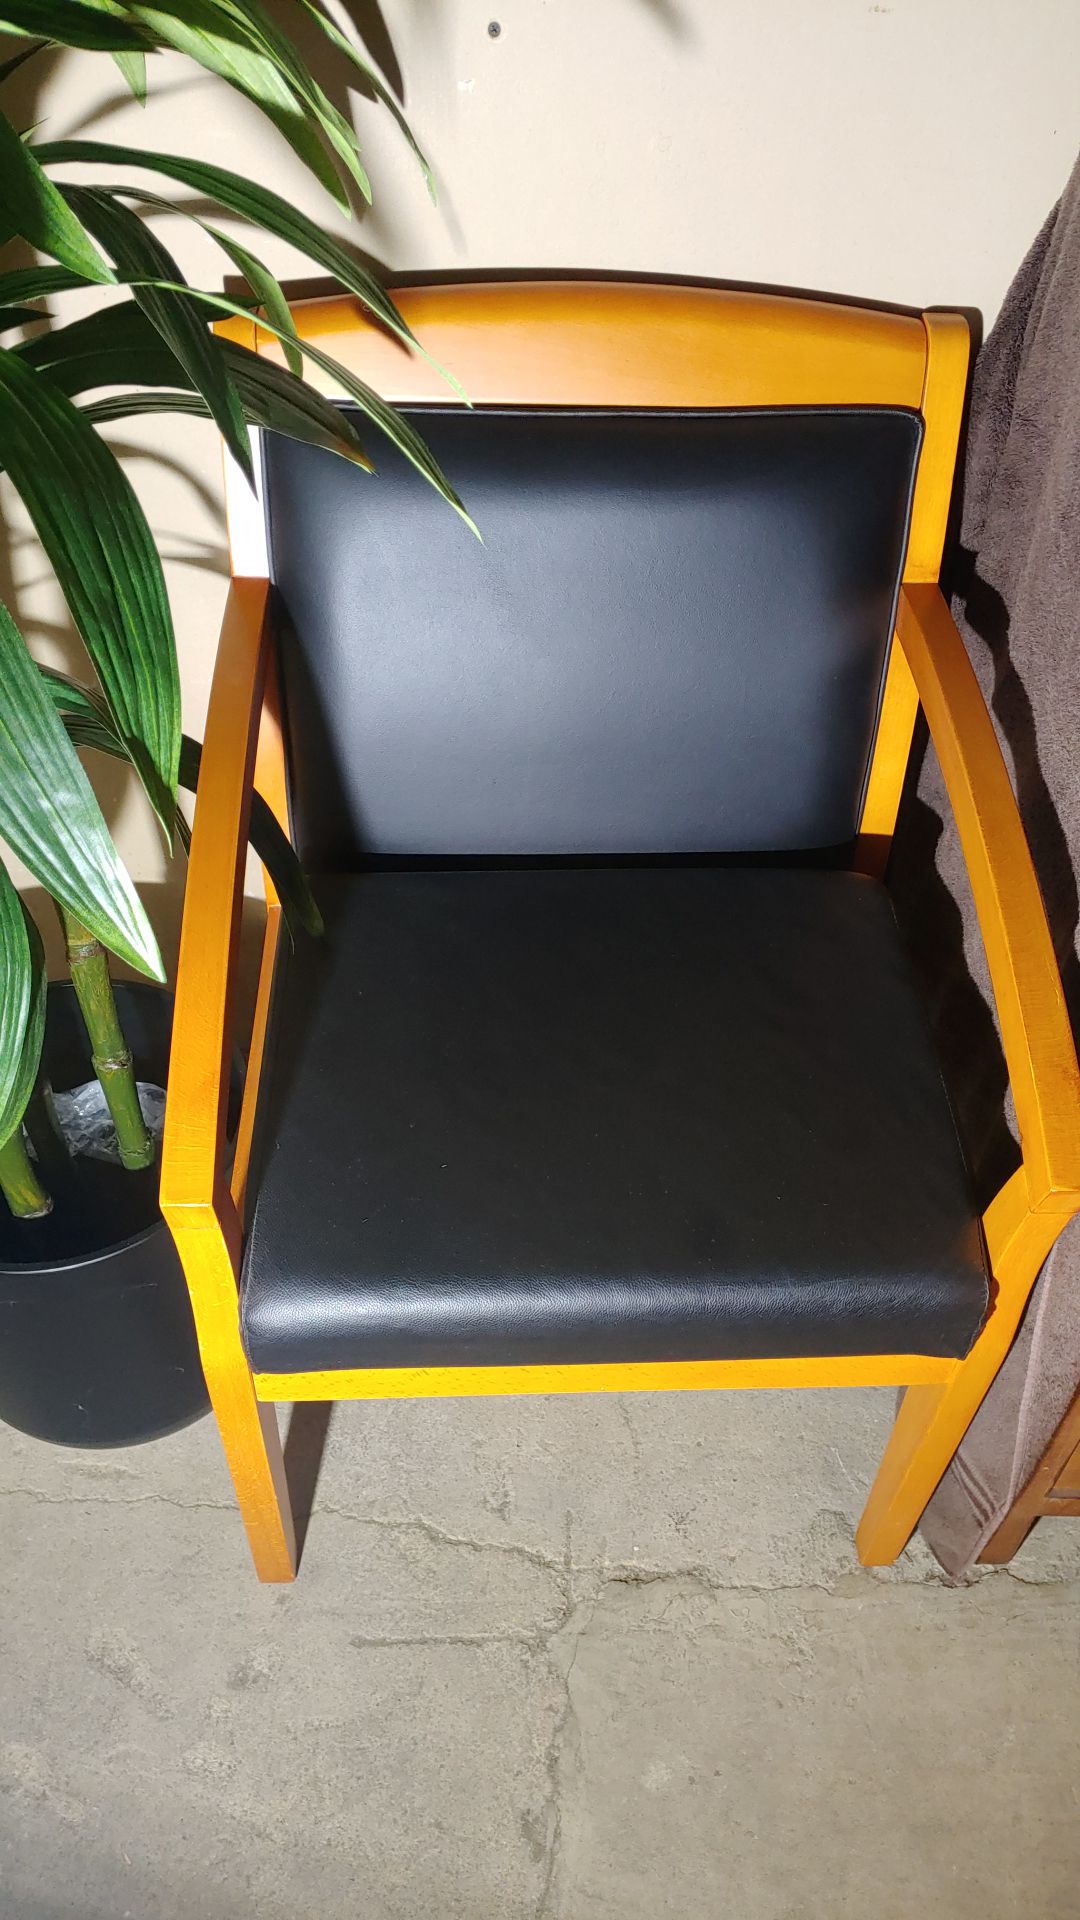 Tiffany guest chair (see label in photos). Quality, Solid. $40obo